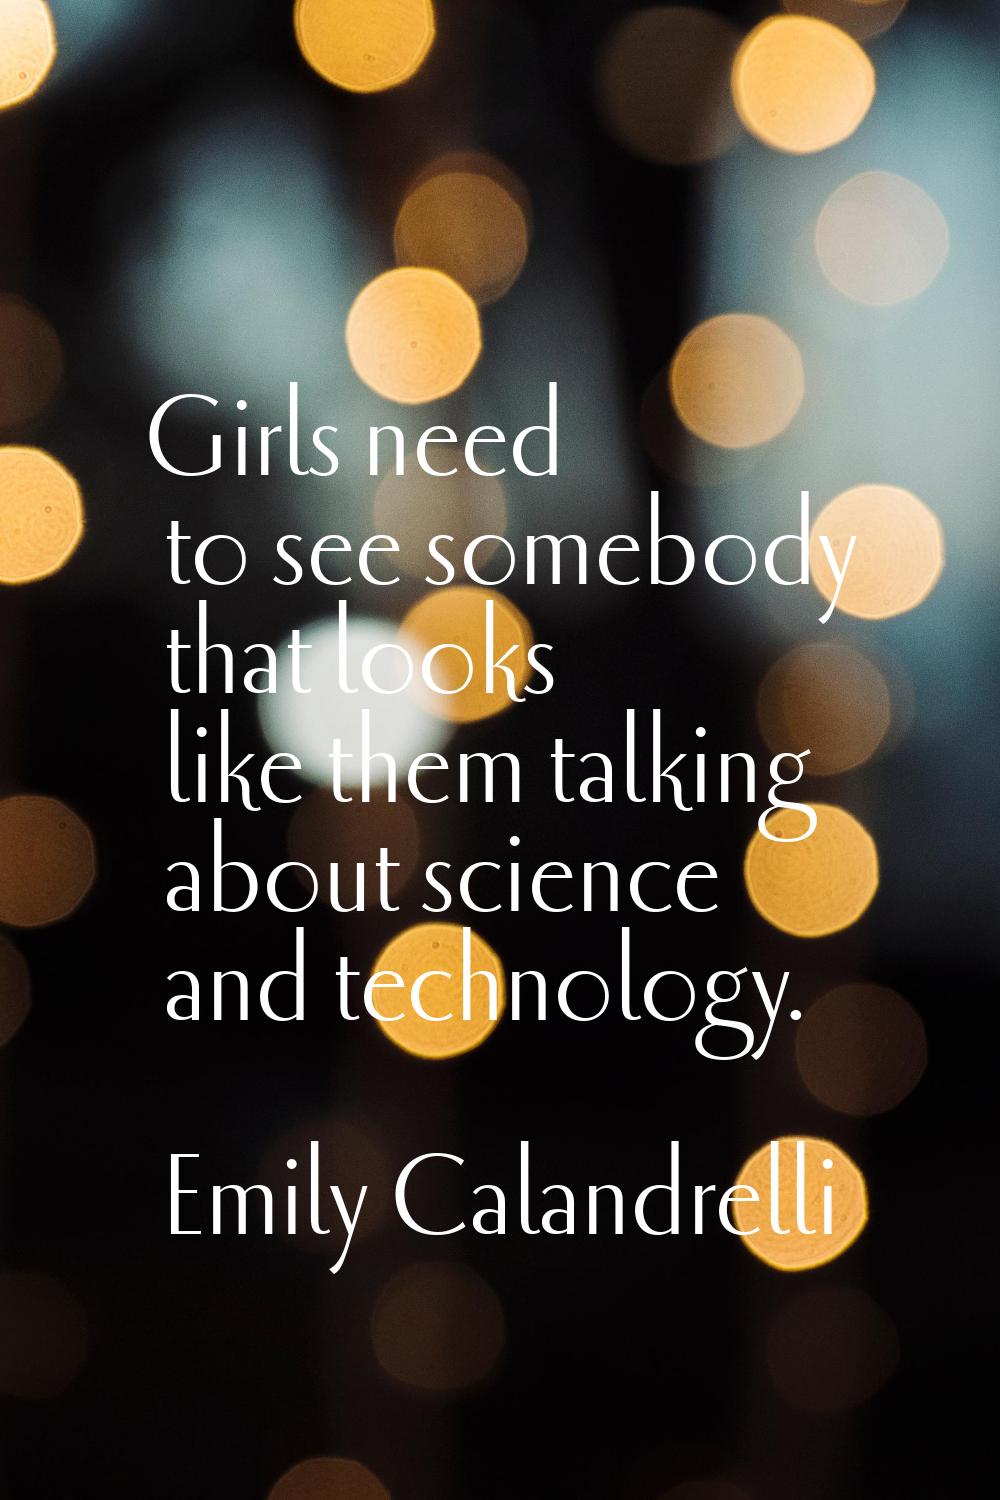 Girls need to see somebody that looks like them talking about science and technology.